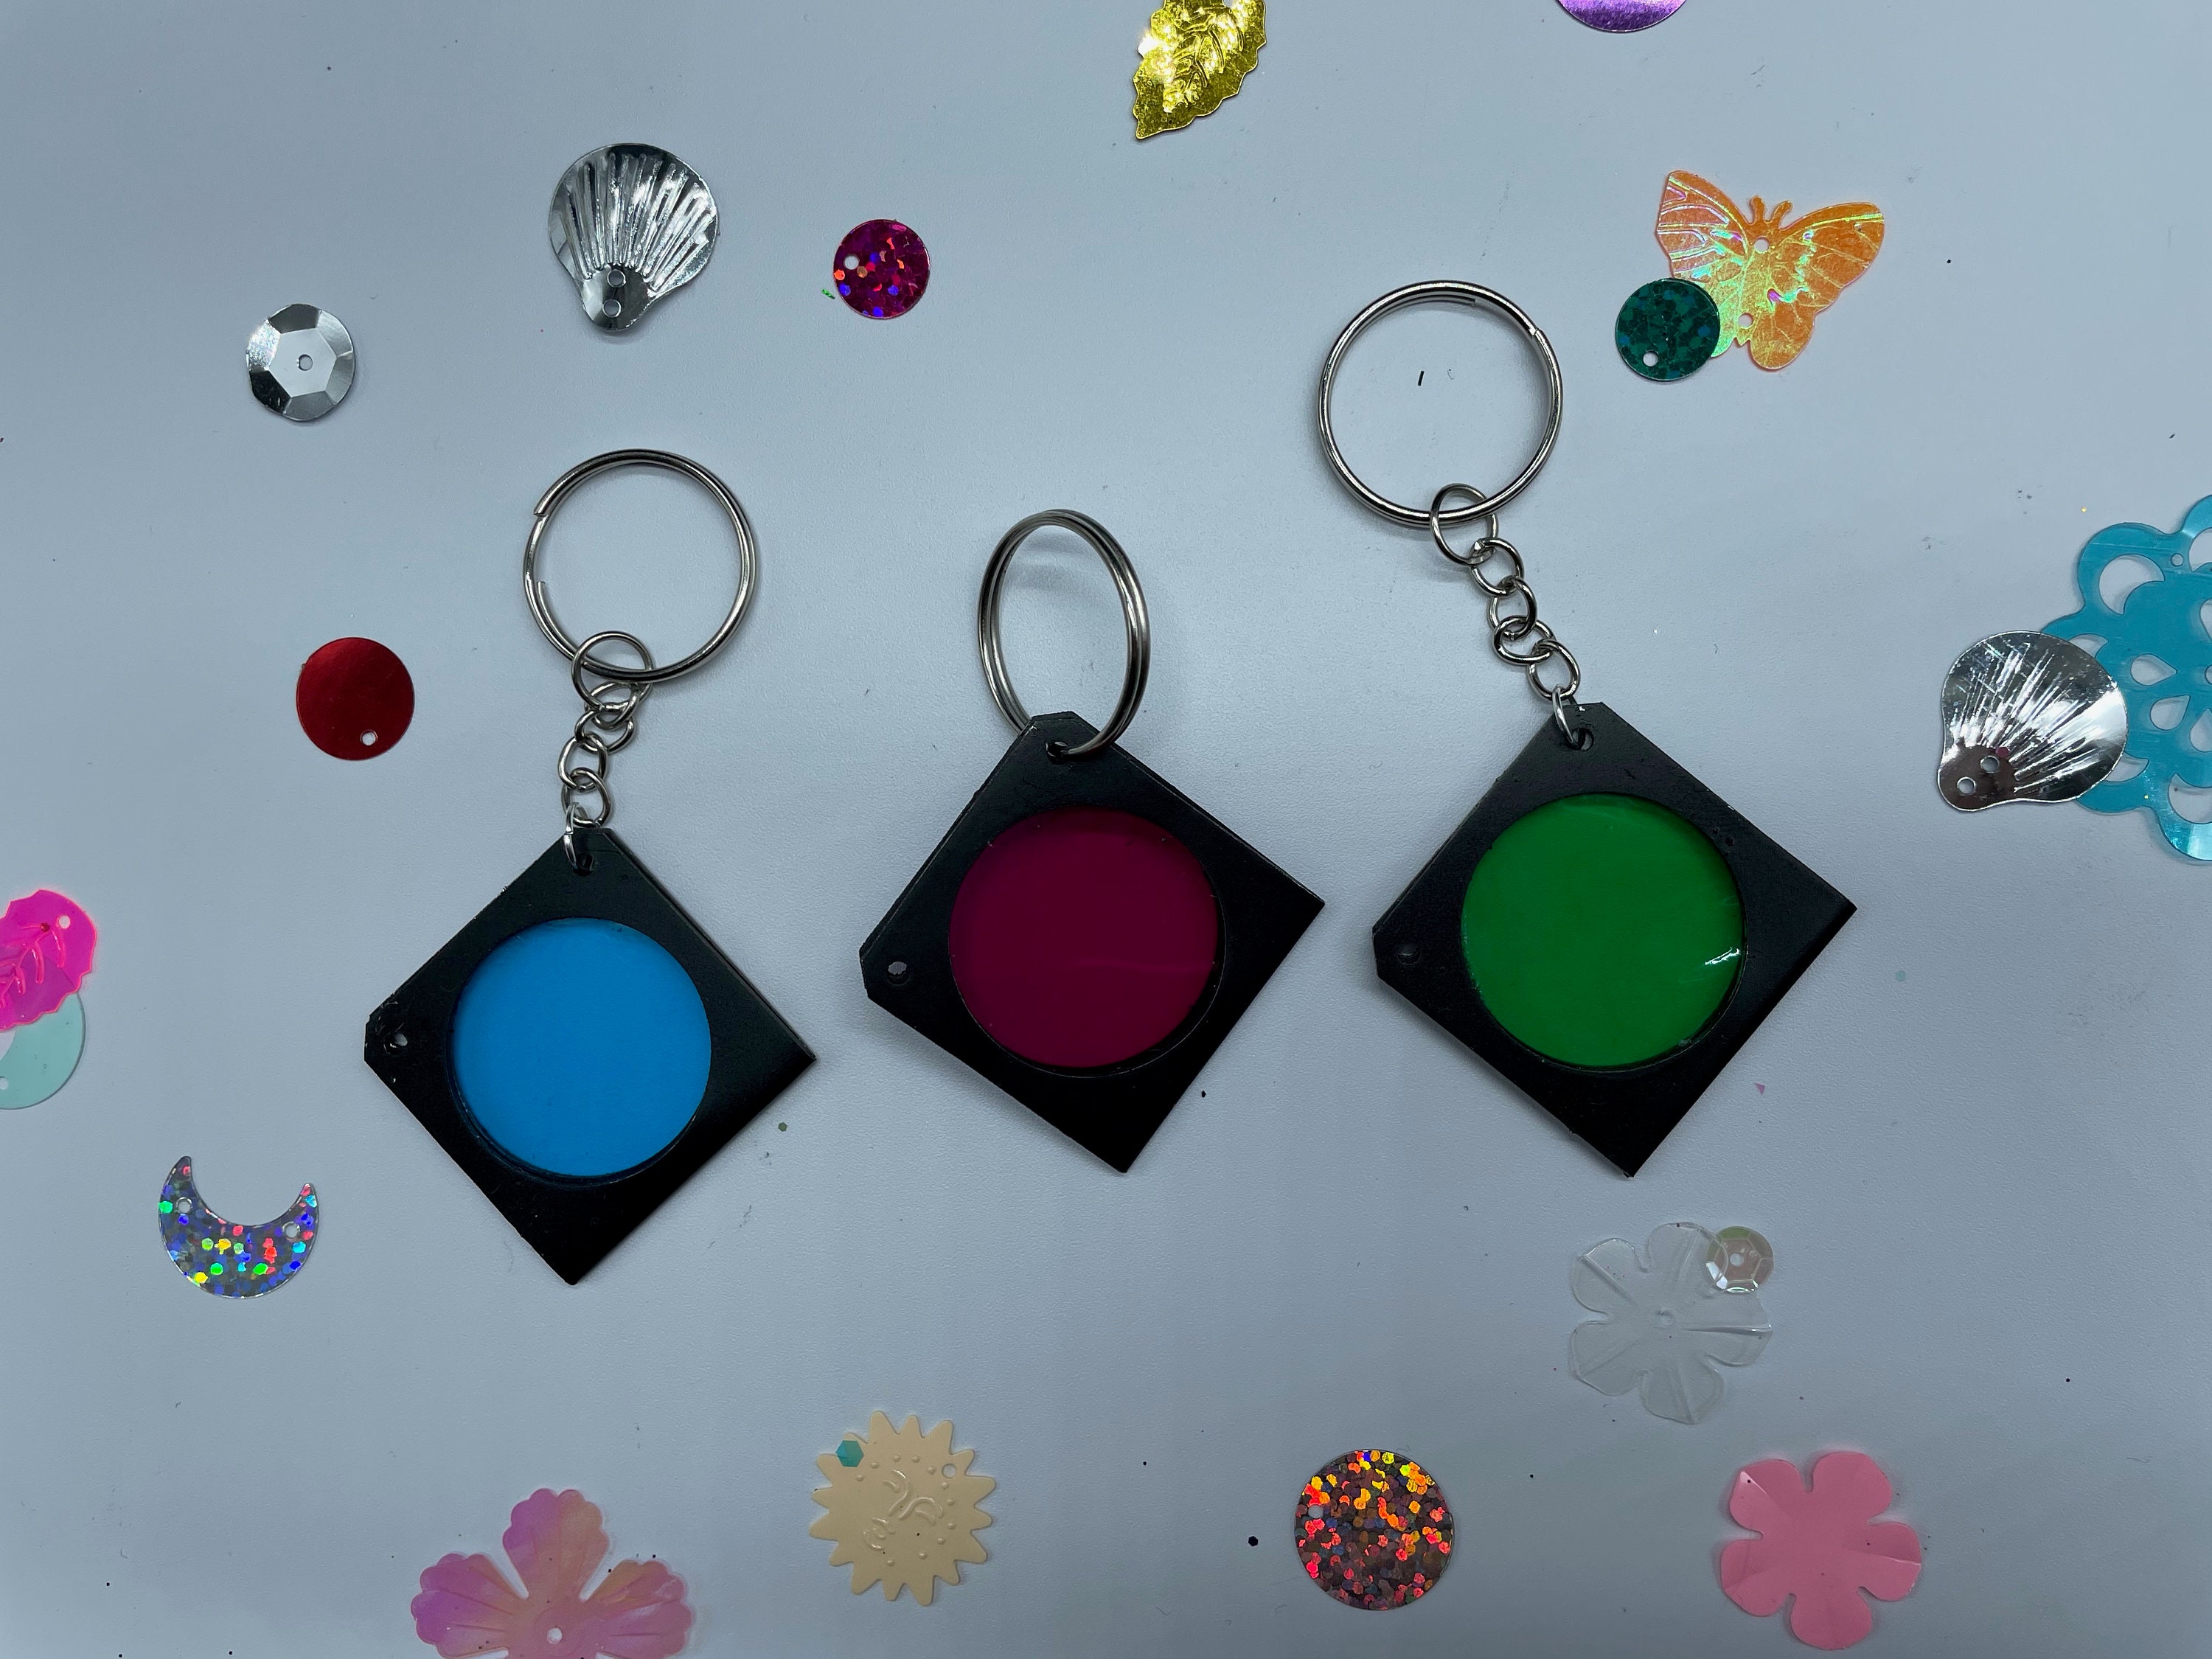 Designer Keychains On Sale - Authenticated Resale